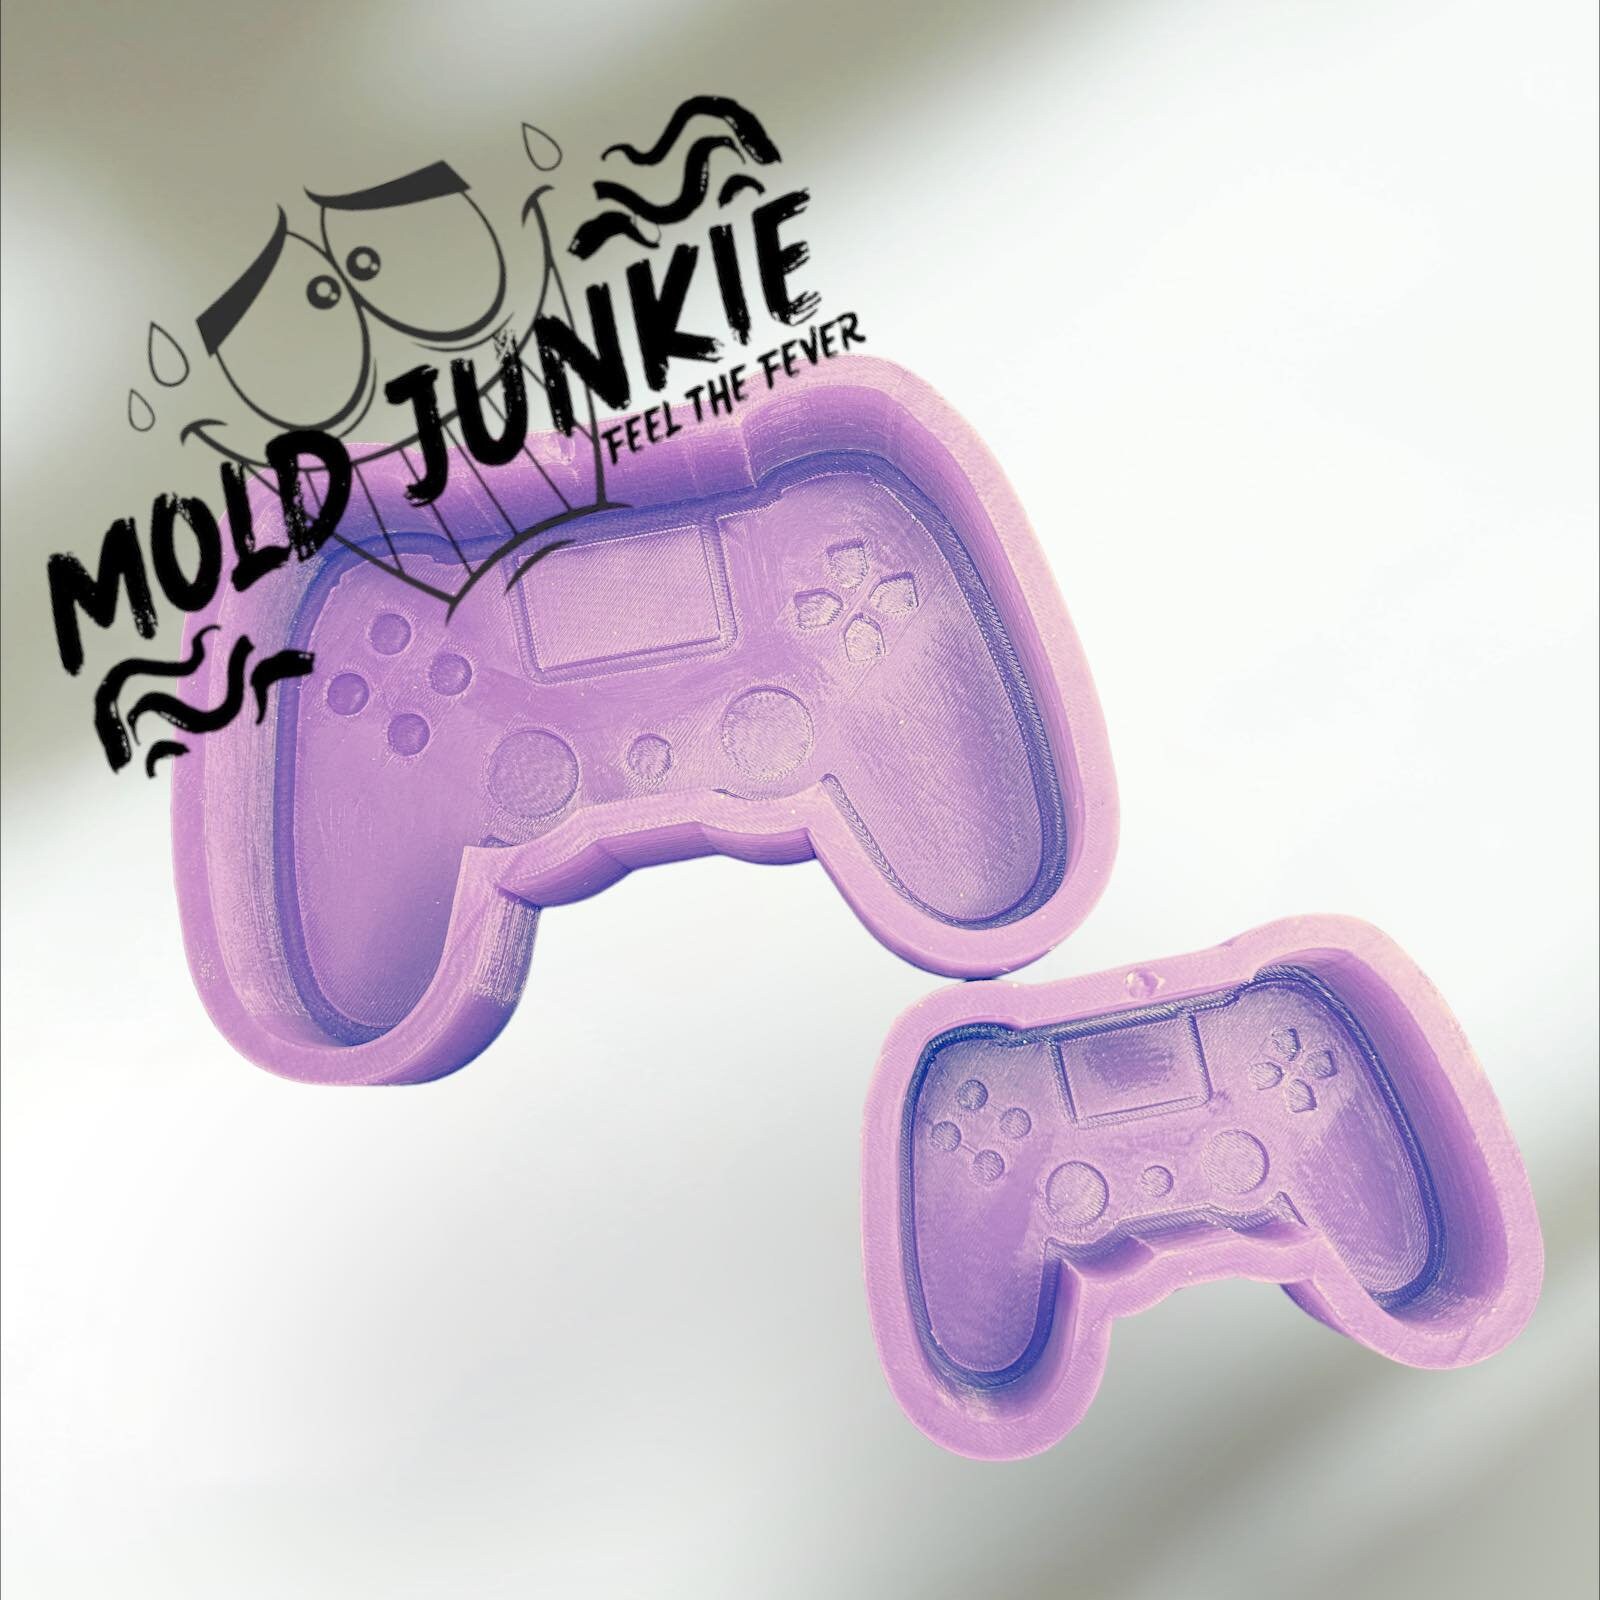 Game Controller Food Molds : Game Controller Silicone Mold